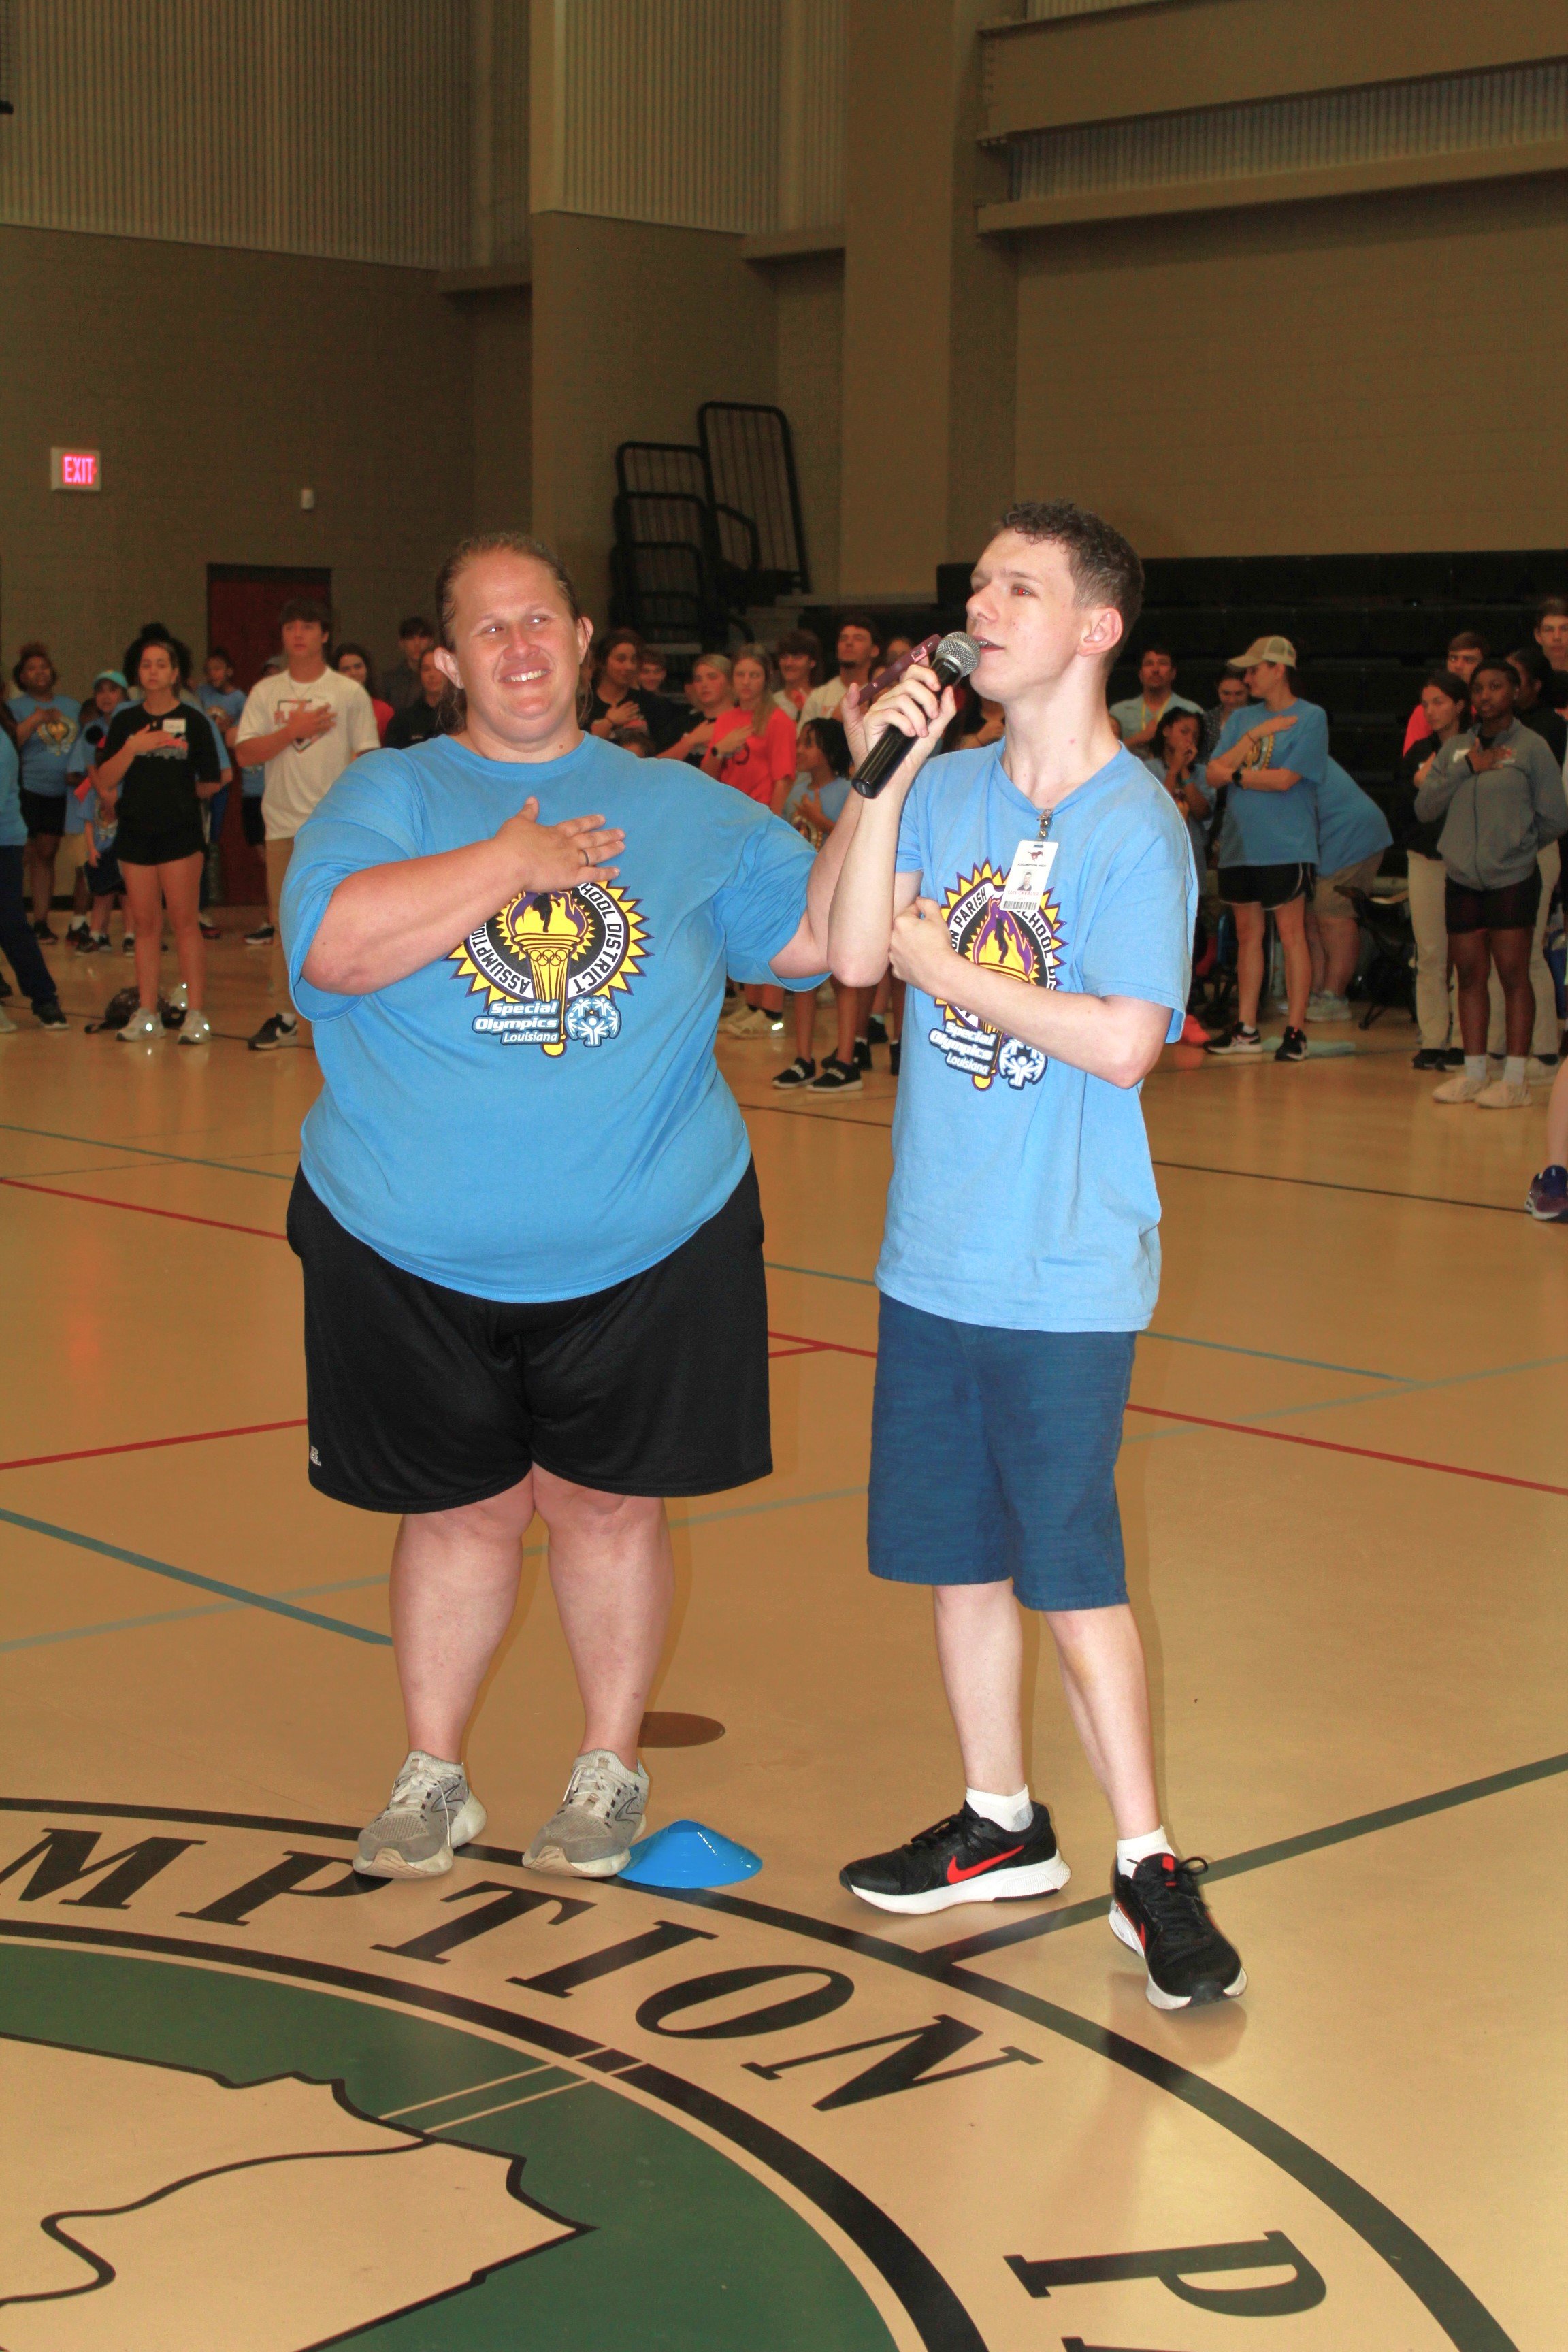  Assumption High School Senior Tate Cavalier, right, sang the National Anthem at the Assumption Parish Public Schools Special Olympics on May 10.&nbsp; Teacher Heather Templet, left, assisted him with the center-court presentation. 